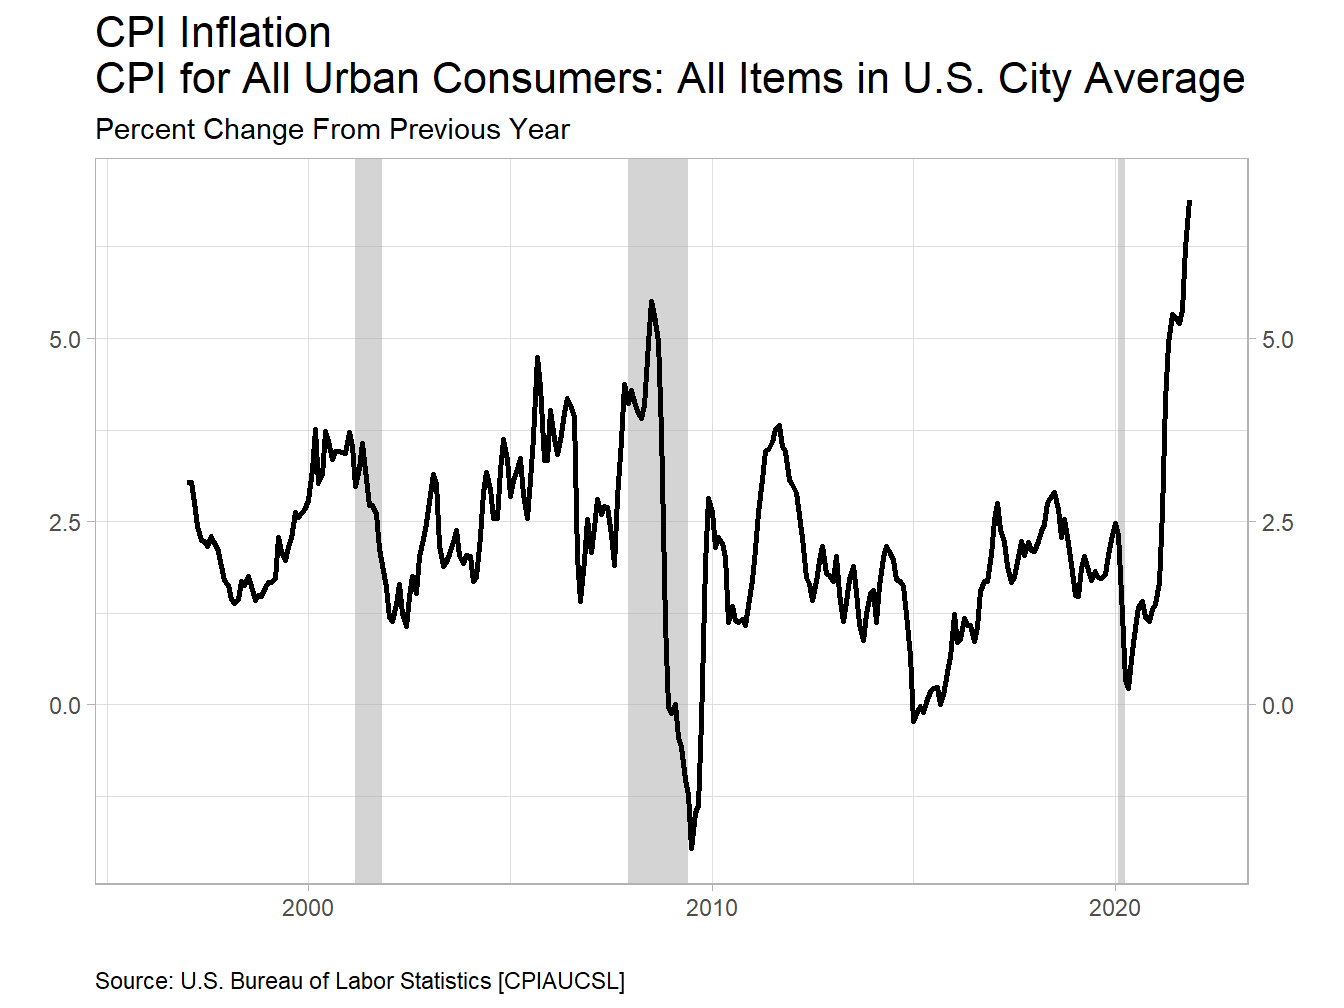 Inflation Rates Are Measuring the Change in the Price Level